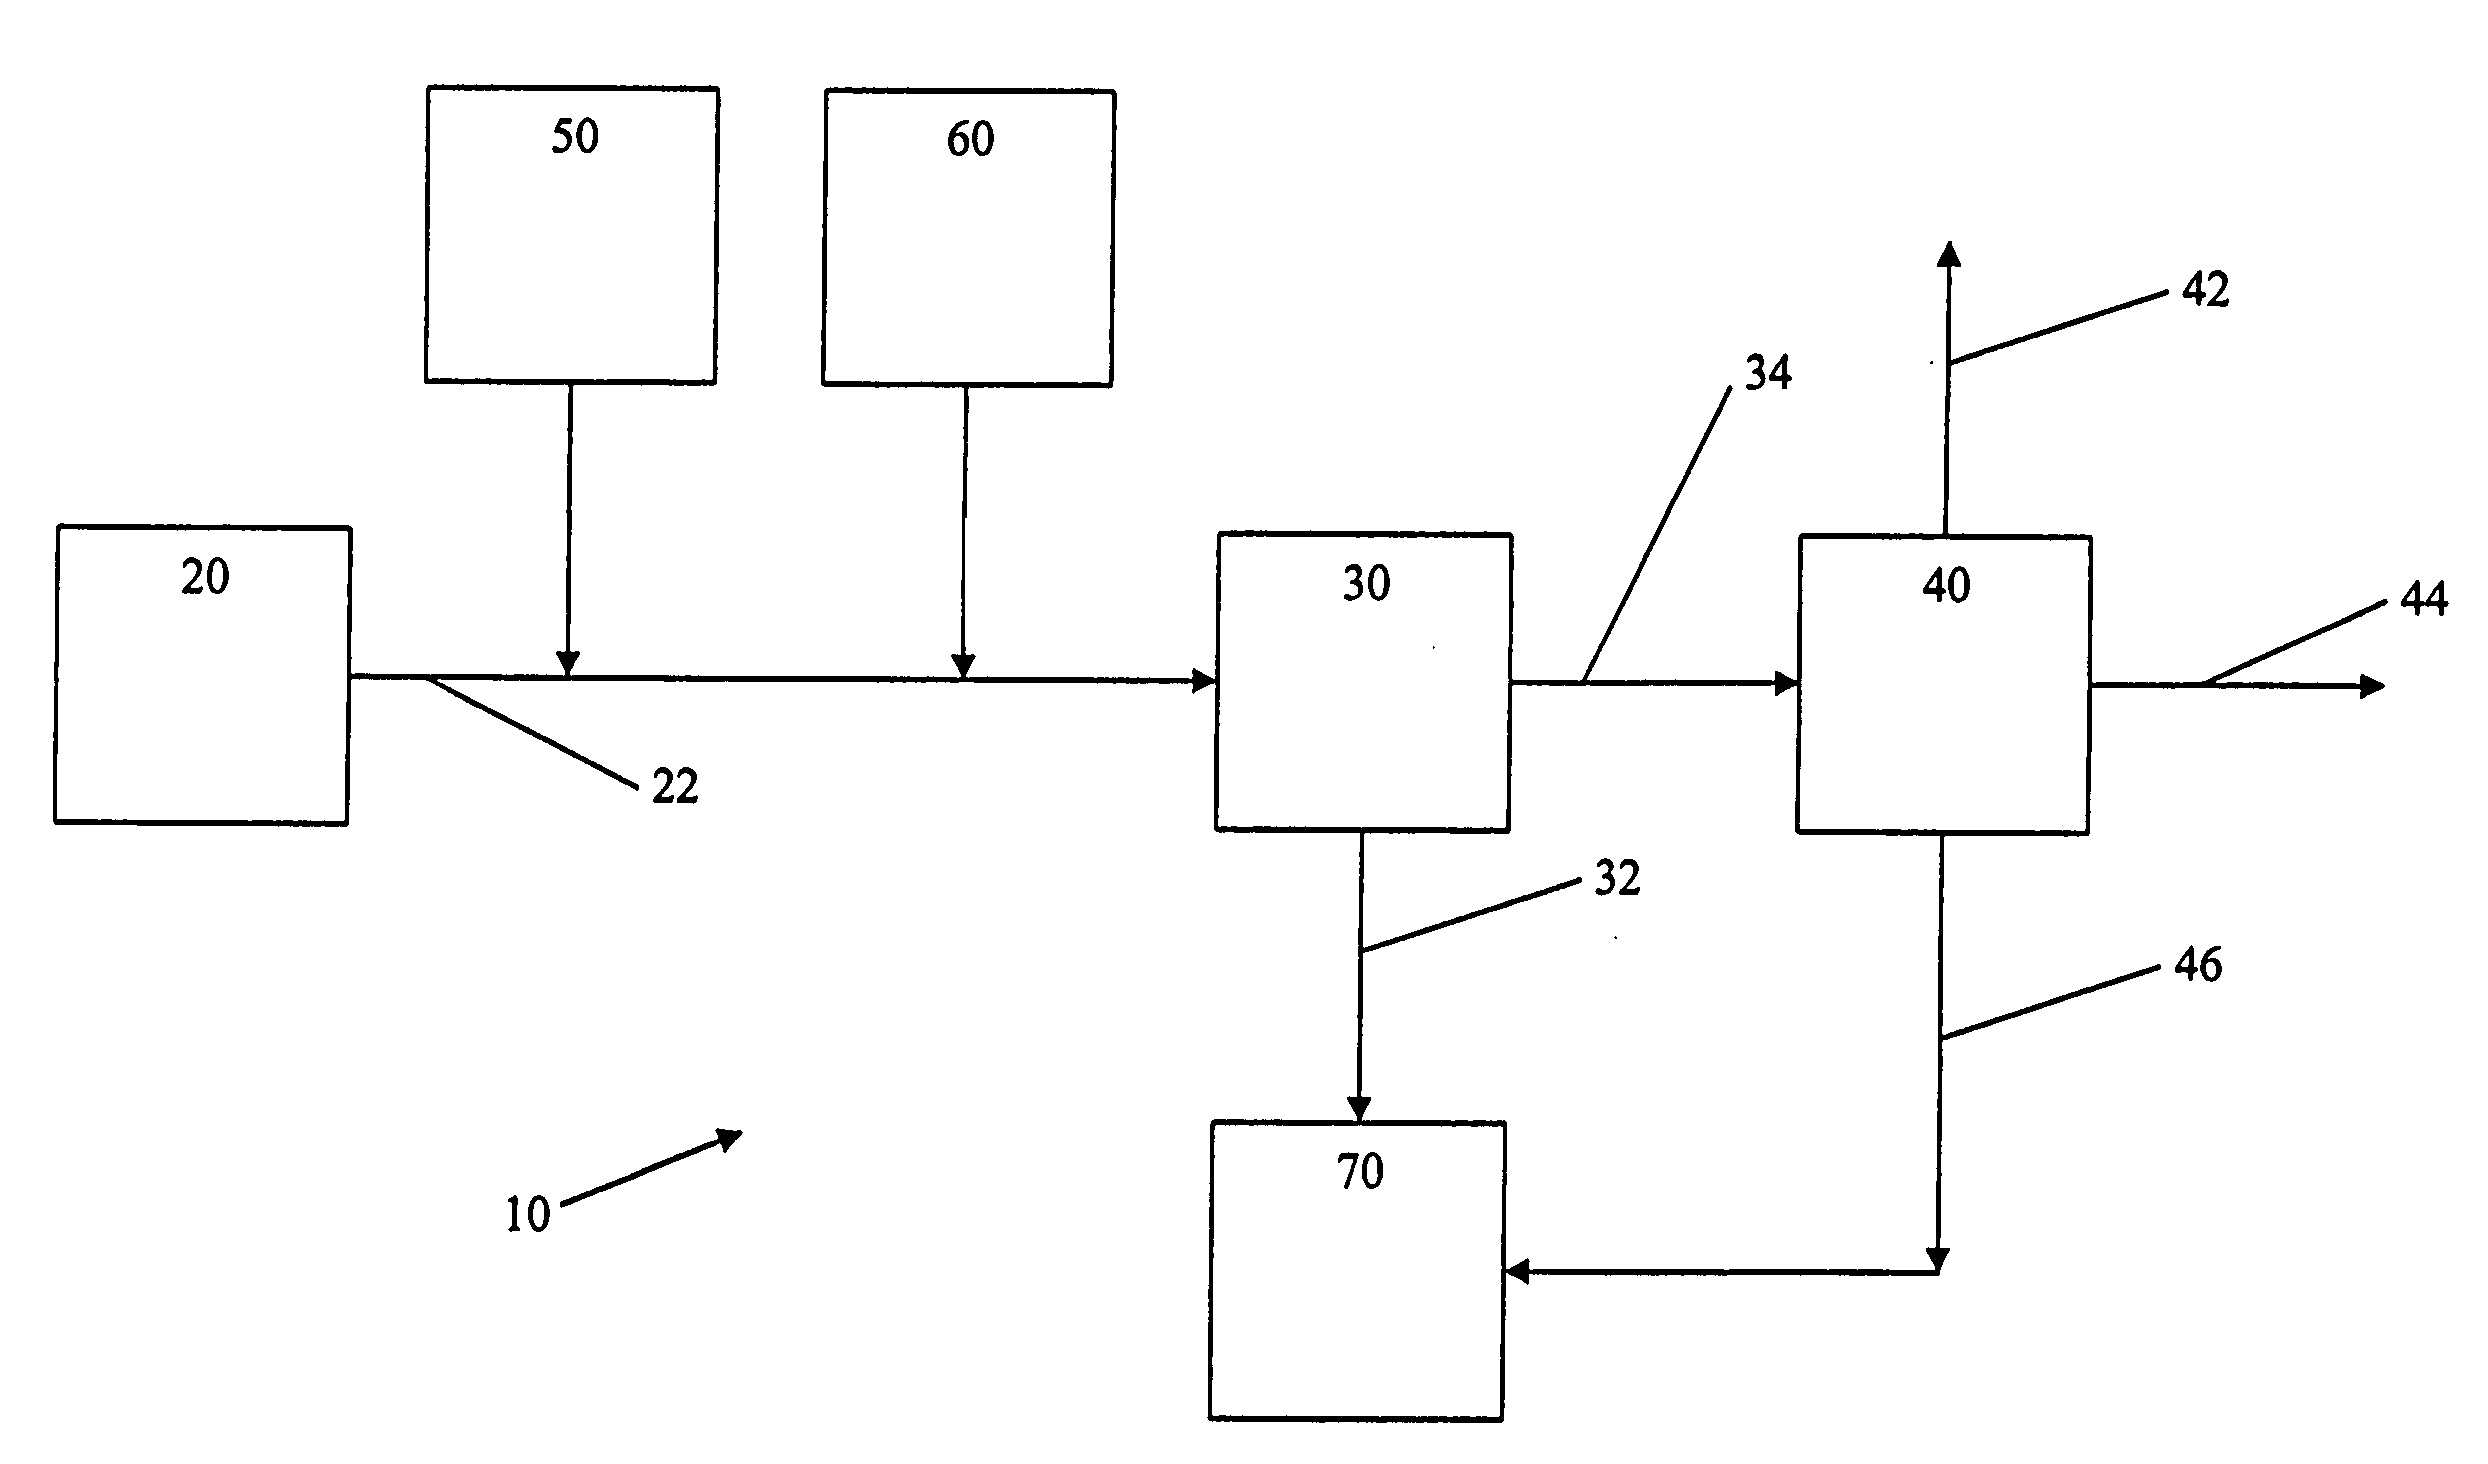 System and method for recovering oil from a waste stream